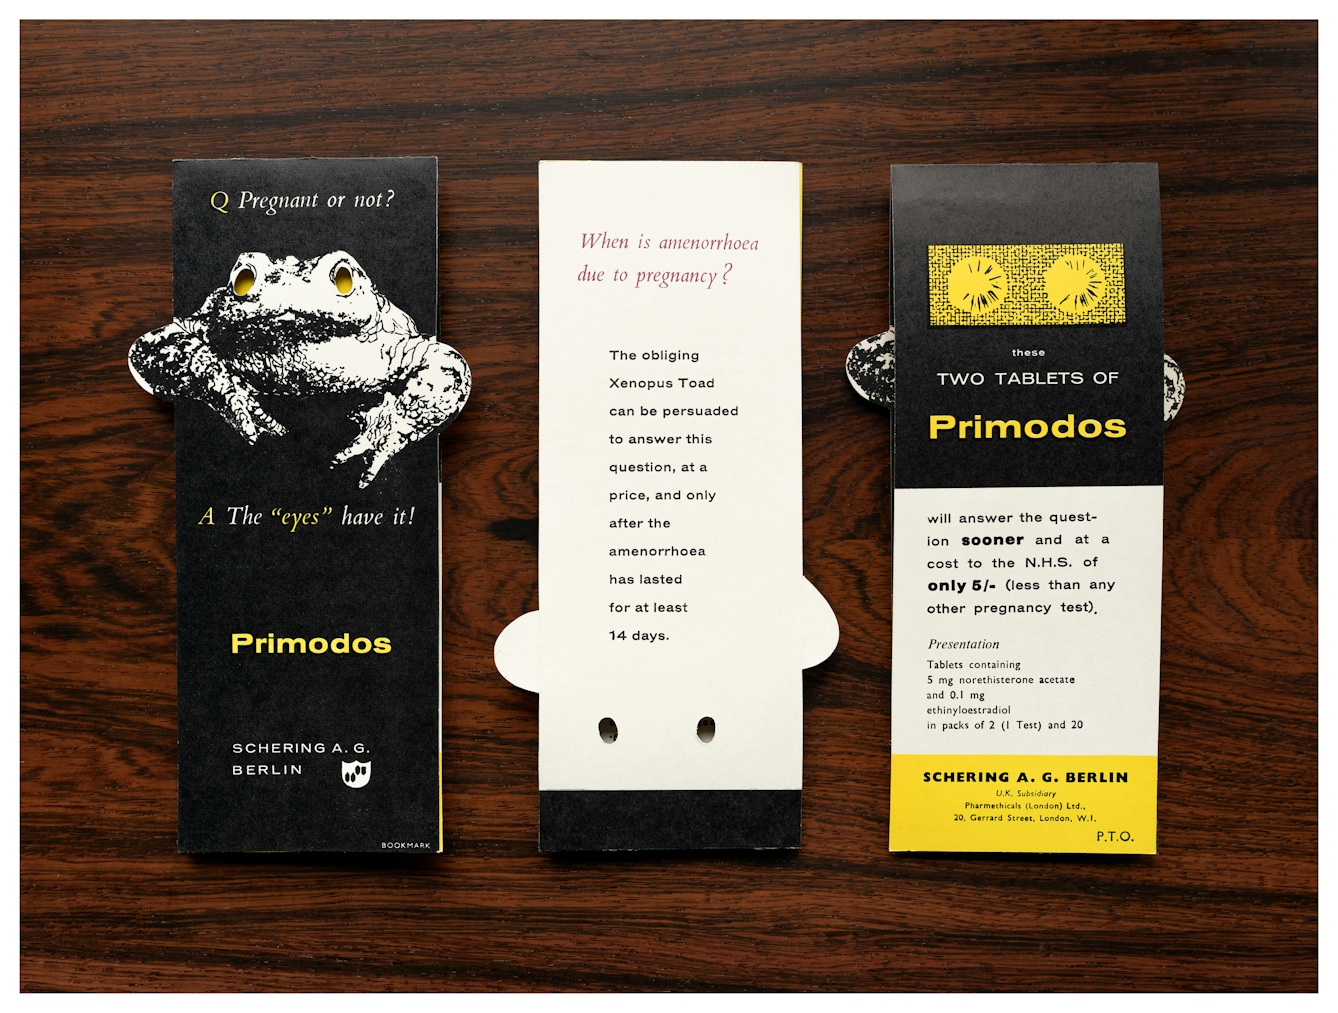 Photograph of a promotional folding leaflet for Primodos. The front, back and inside are show side-by-side on a dark wooden tabletop. The front cover shows an illustration of a frog with cutout eyes showing the yellow colour of the page beneath. The cover says, "Q Pregnant or not? A The 'eyes' have it! Primodos, Schering A.G. Berlin. The back cover reads "When is amenorrhoea due to pregnancy? The obliging Xenopus Toad can be persuaded to answer this question, and only after the amenorrhoea has lasted for 14 days." The inside cover reads "these two tablets of Primodos will answer the question sooner and at a cost to the N.H.S of only 5/- (less than any other pregnancy test). Presentation: Tablets containing 5mg norethisterone acetate and 0.1 mg ethinyloestradiol in packs of 2 (1 test) and 20. Schering A.G. Berlin."